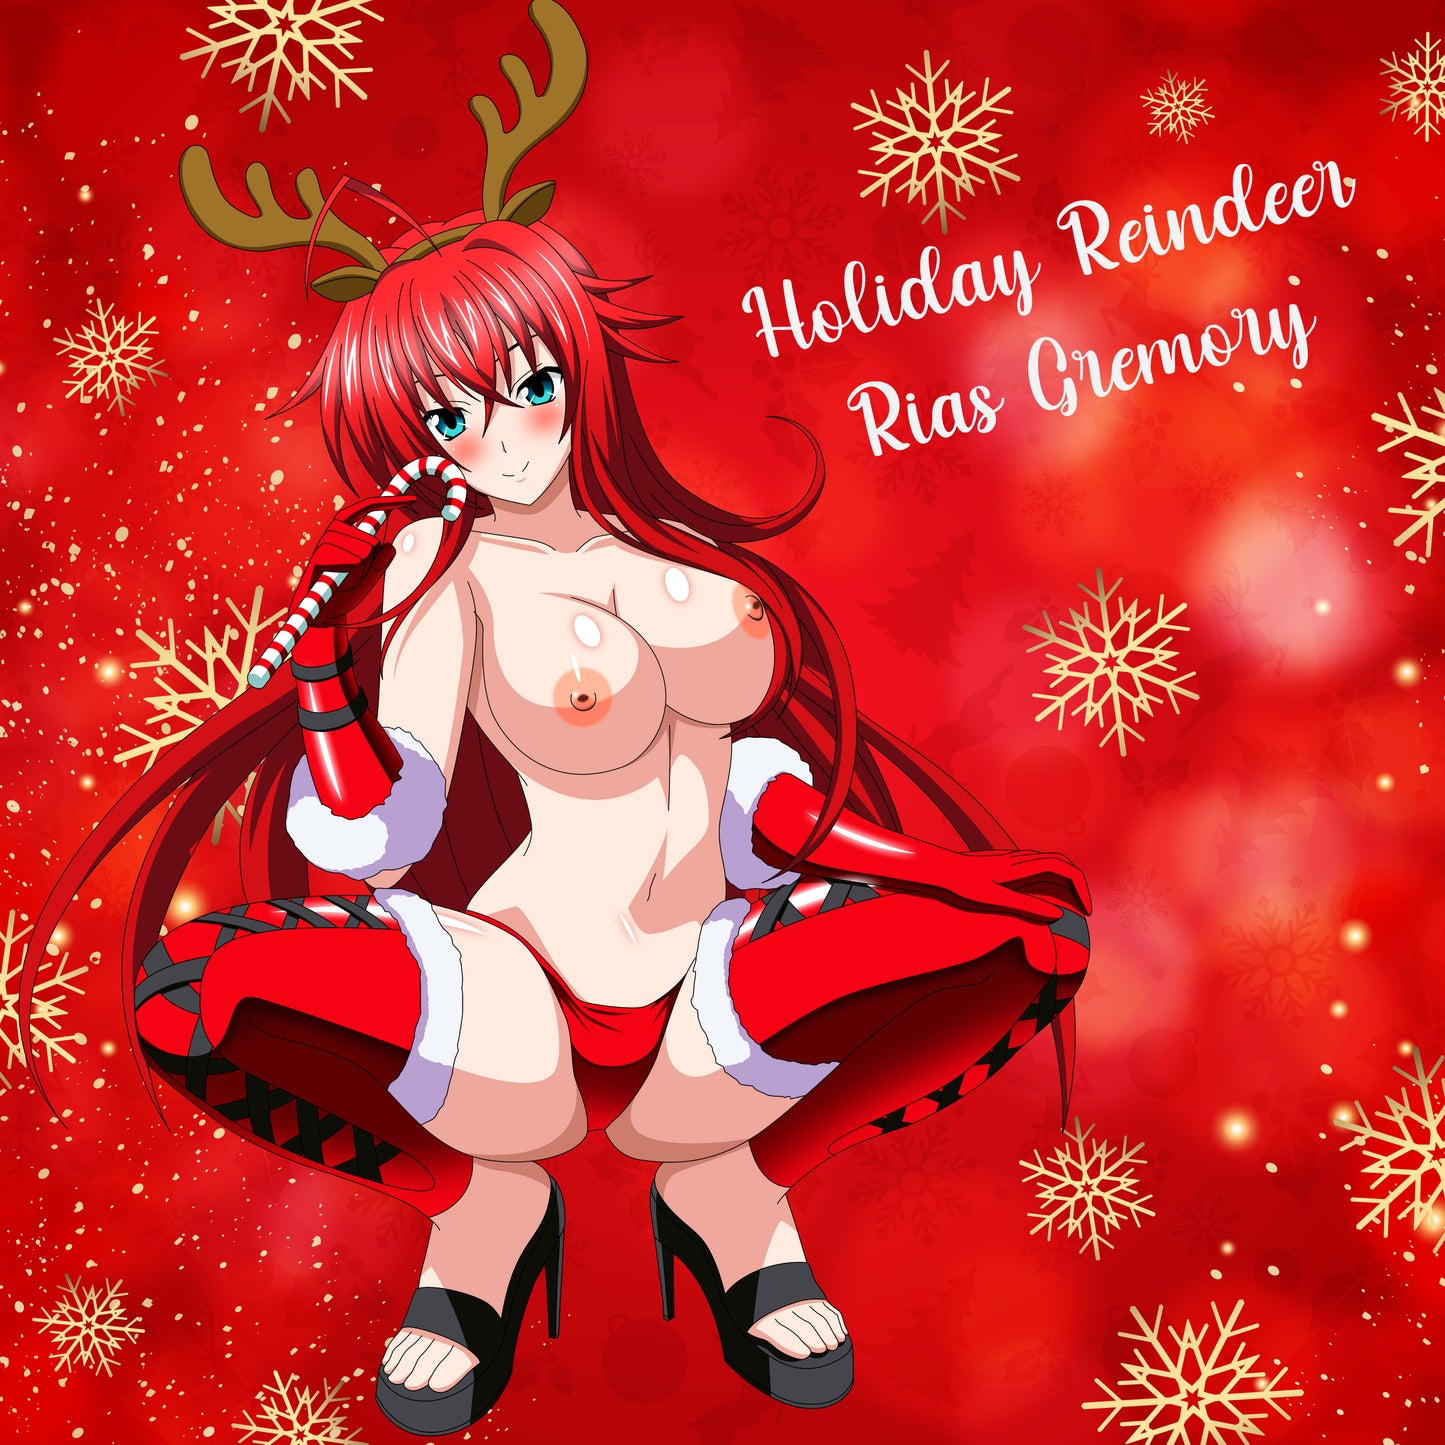 Holiday Reindeer Rias Gremory